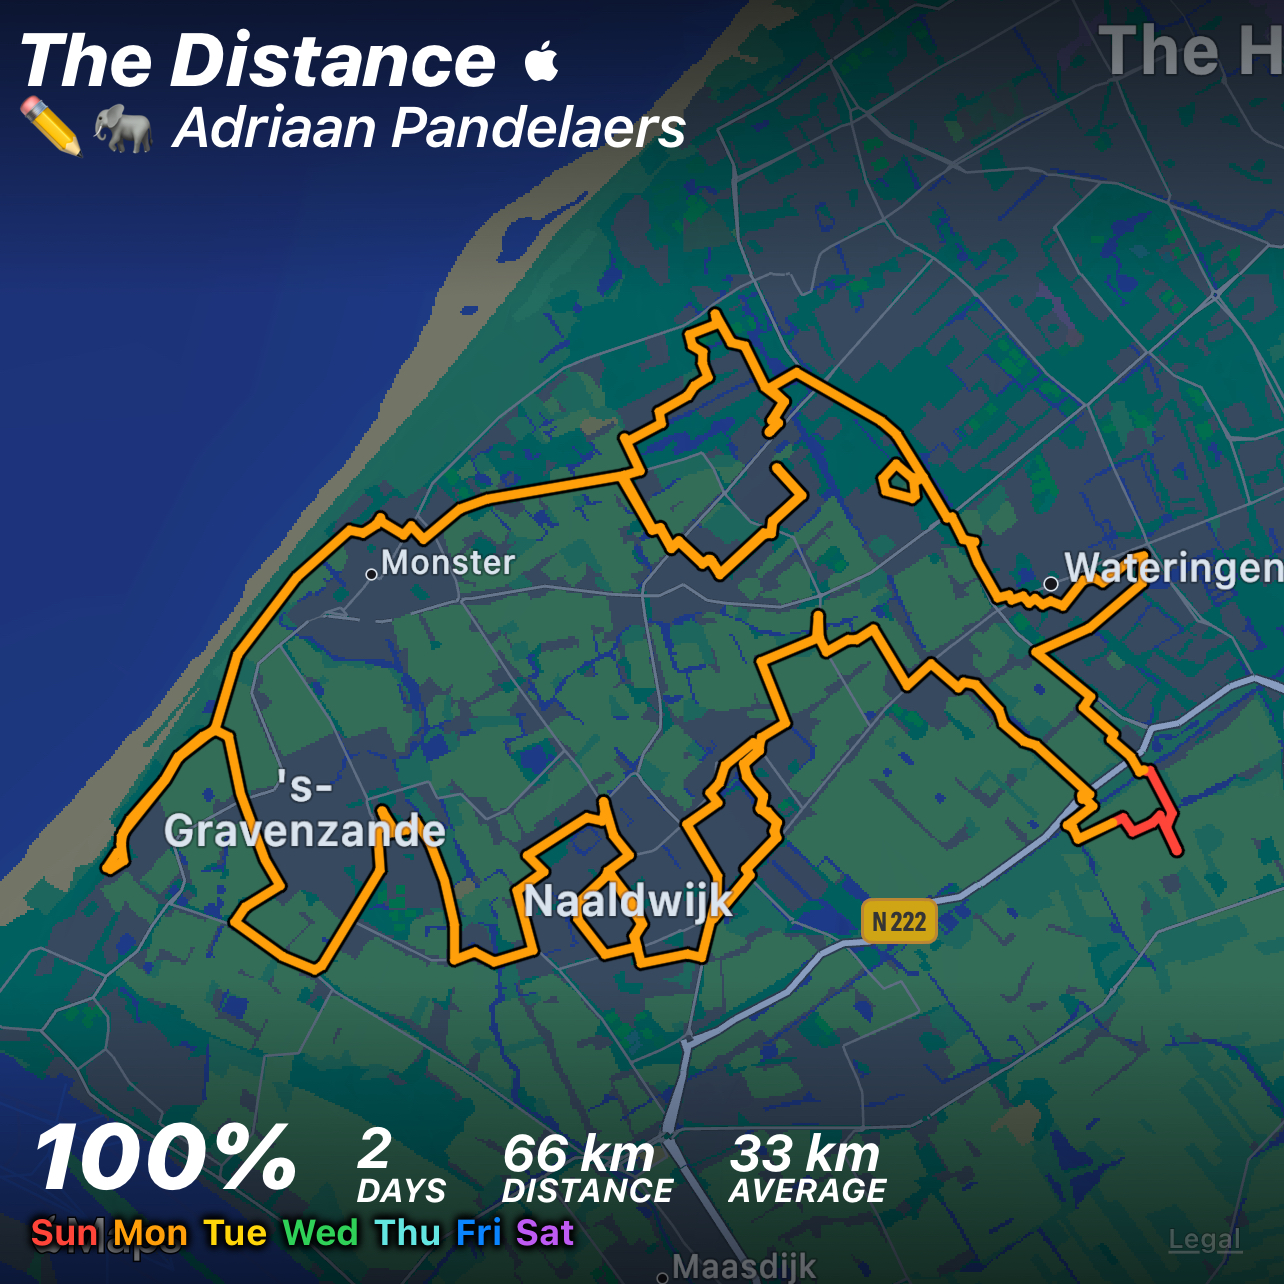 An export of a map of the Rotterdam area of Netherlands from The Distance. A bike route is drawn on the map using rainbow colours. Each colour represents a different day of activity.